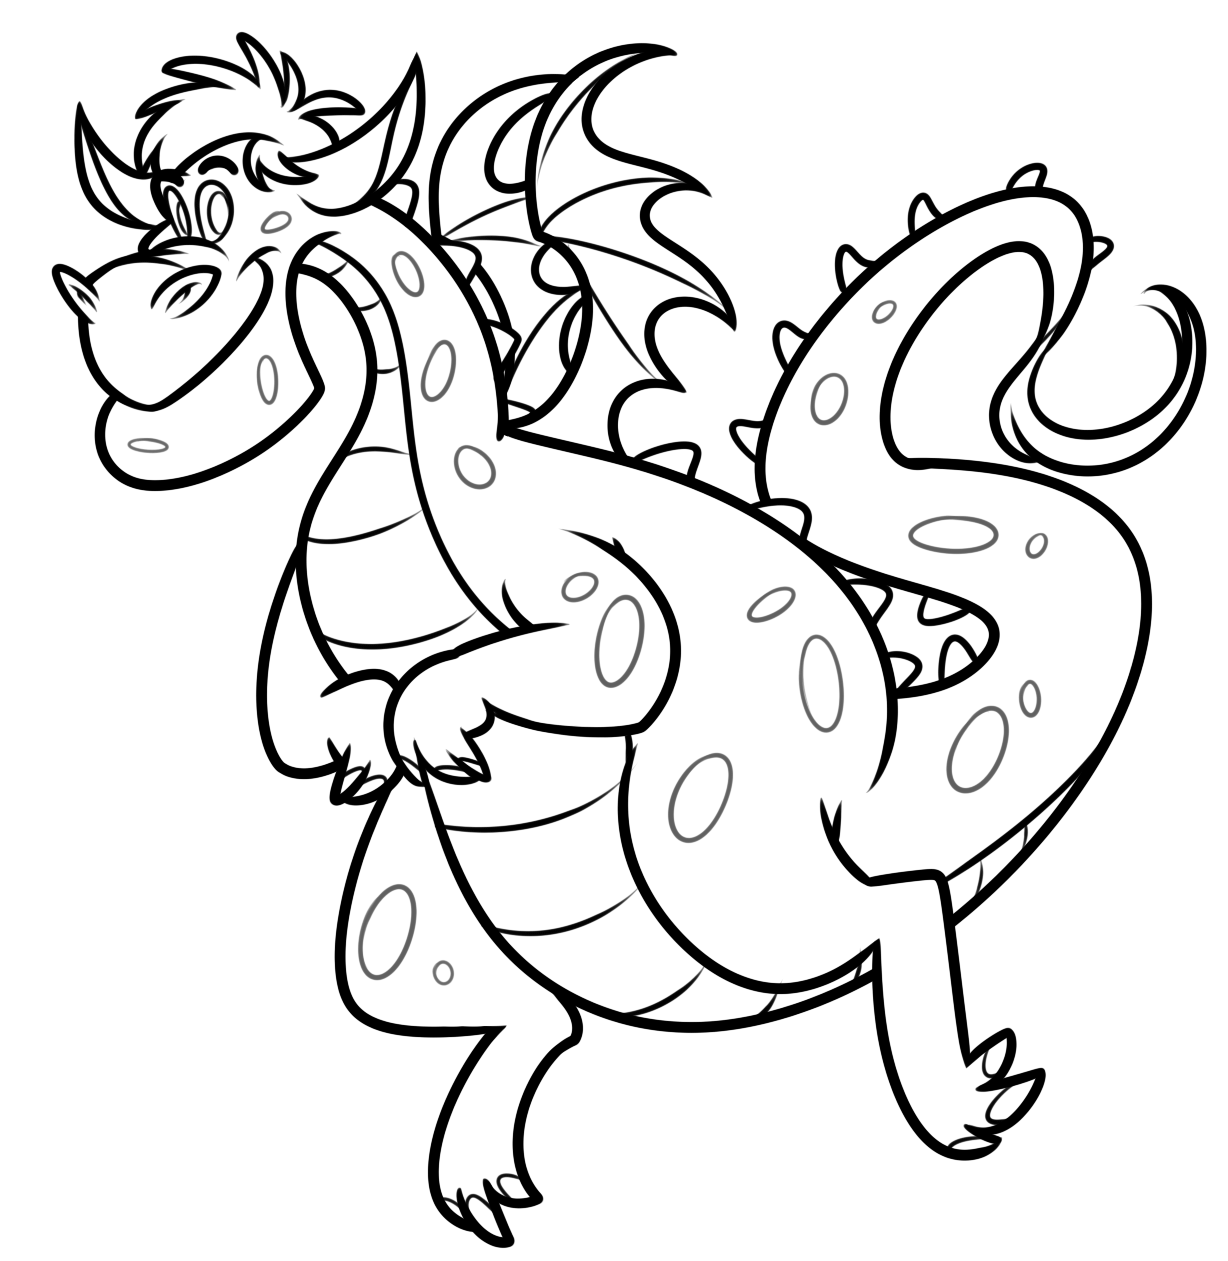 Petes Dragon Coloring pages to download and print for free